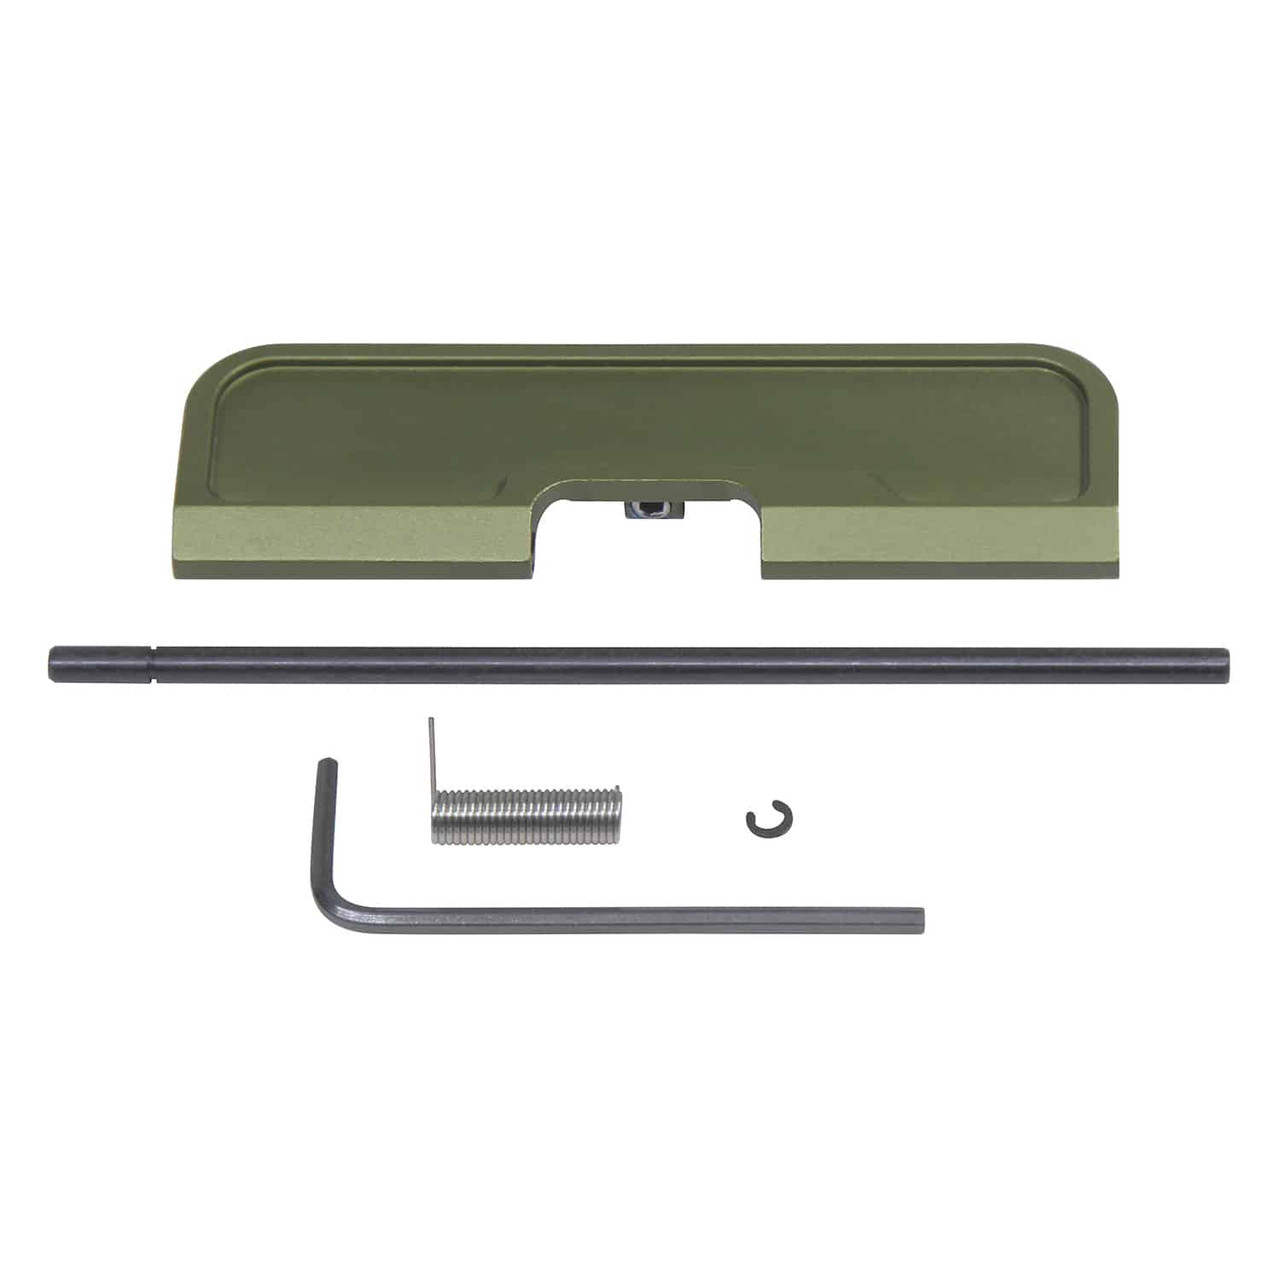 Guntec USA 223GATE-G3-GREEN Ejection Port Dust Cover Assembly (Gen 3) (Anodized Green)